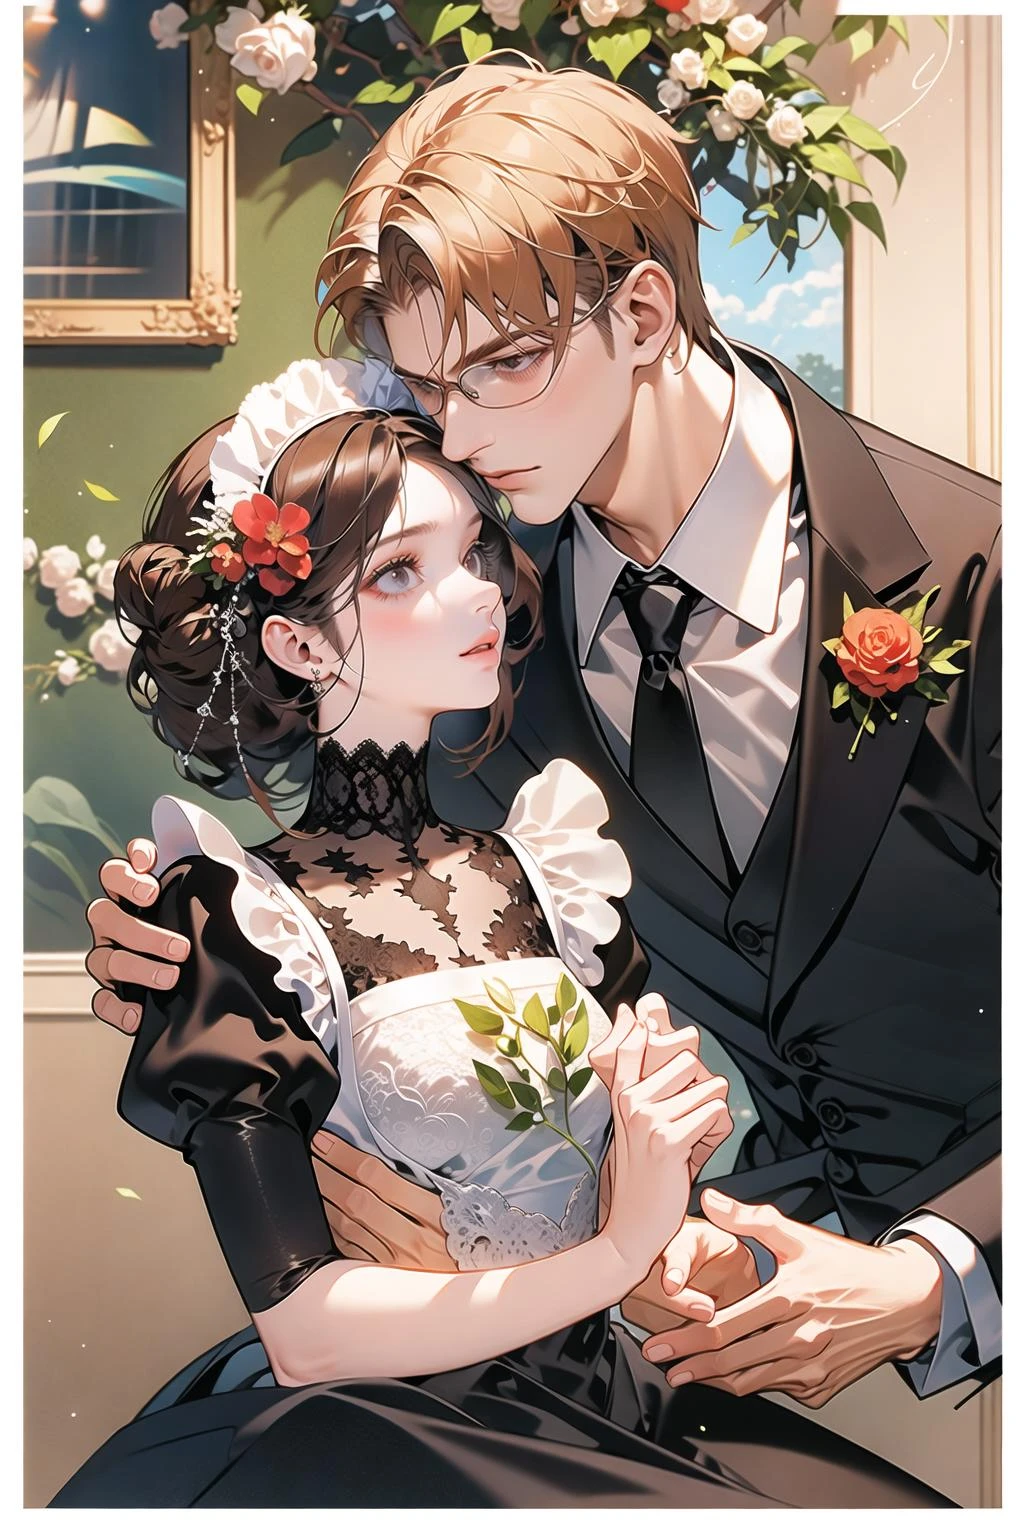 (masterpiece:1.2),(masterpiece, top quality, best quality)
1 girl, 1 boy, 2 people, housekeeper, maid, uniform, suit, maid dress, lace, flowers,
